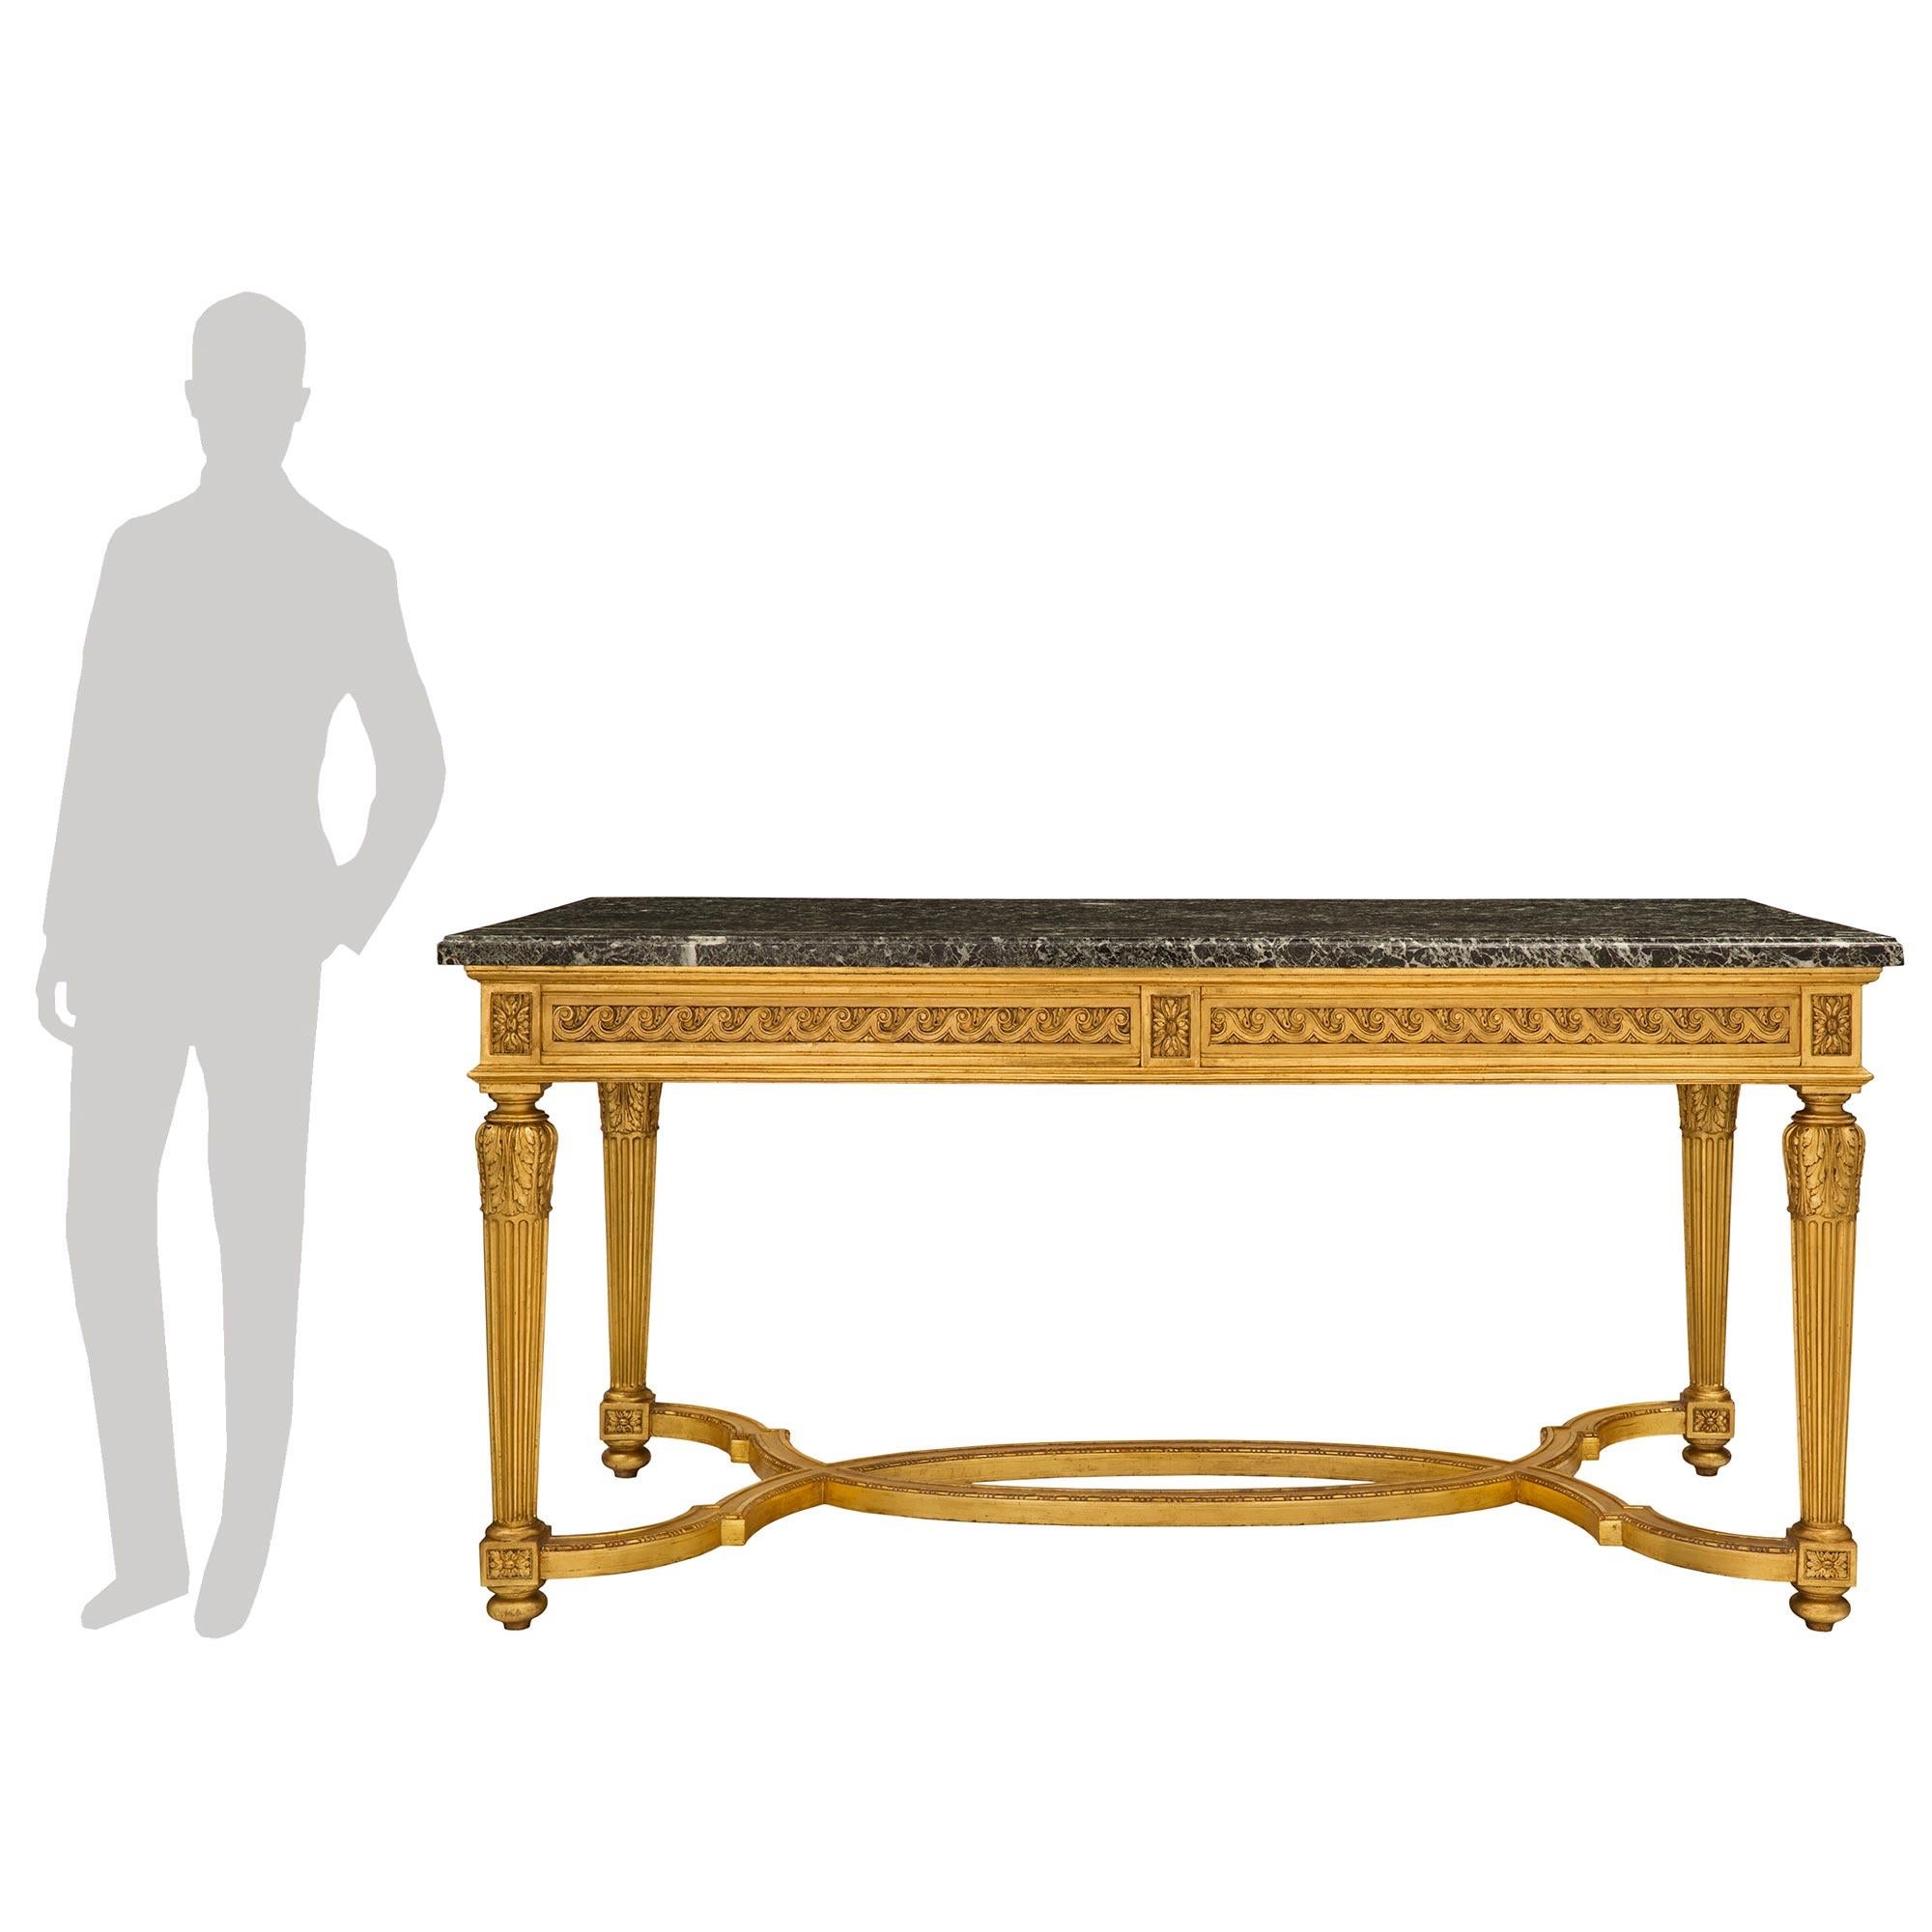 A stunning and extremely high-quality French 19th century Louis XVI style giltwood and Vert Antique marble center table. The large-scaled rectangular two-drawer center table is raised by elegant mottled bun feet below square block rosettes and